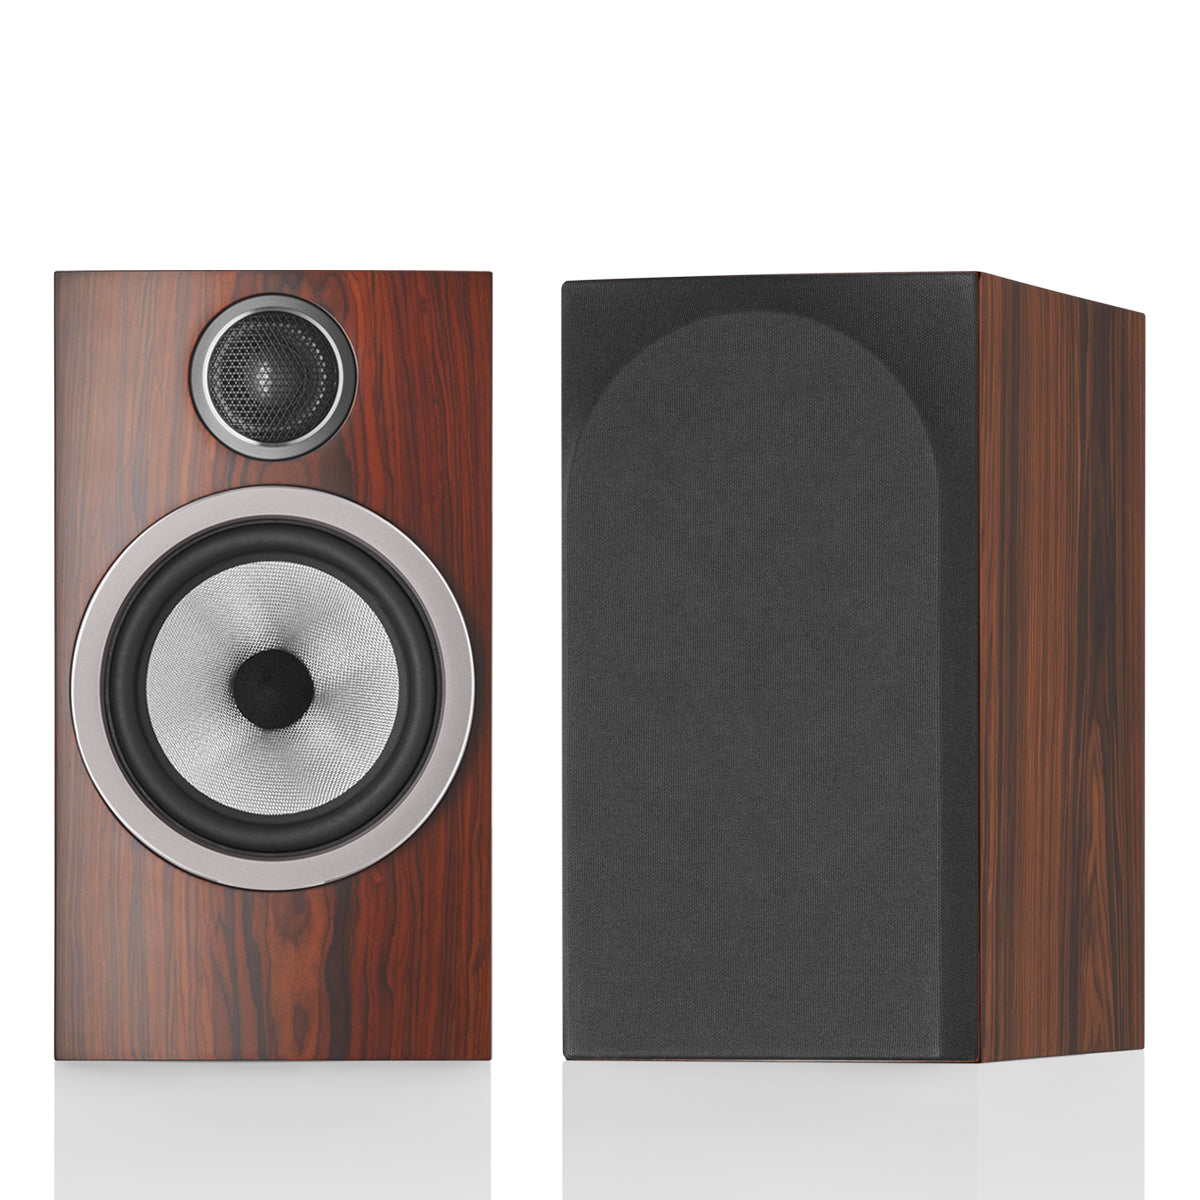 Bowers & Wilkins 706 S3 2-Way Stand Mount Speakers - Mocha - The Audio Experts